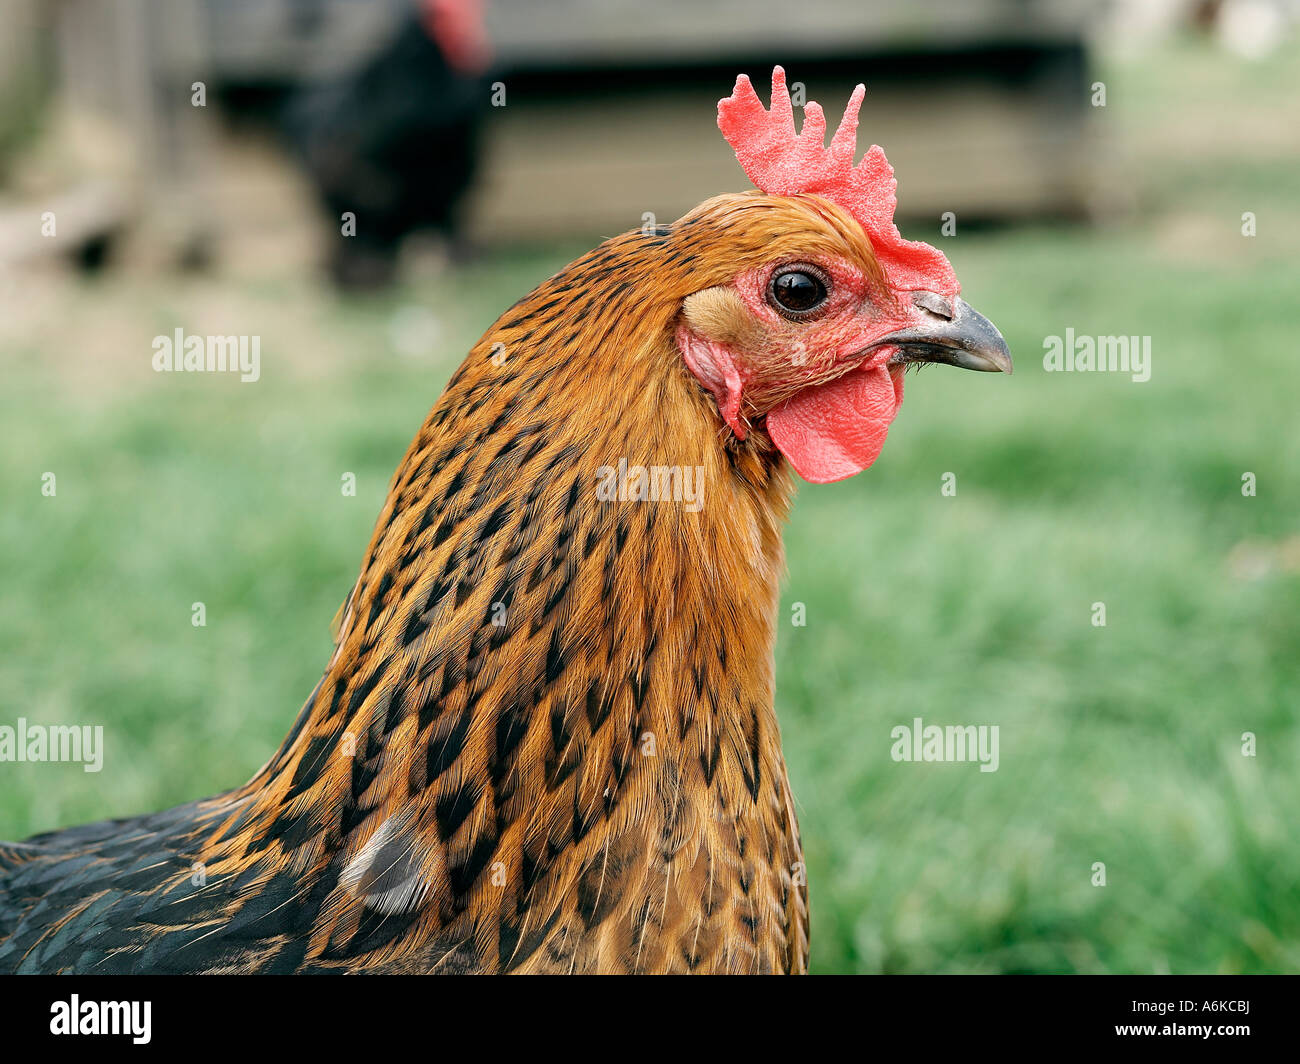 A headshot of an orange rooster. Stock Photo